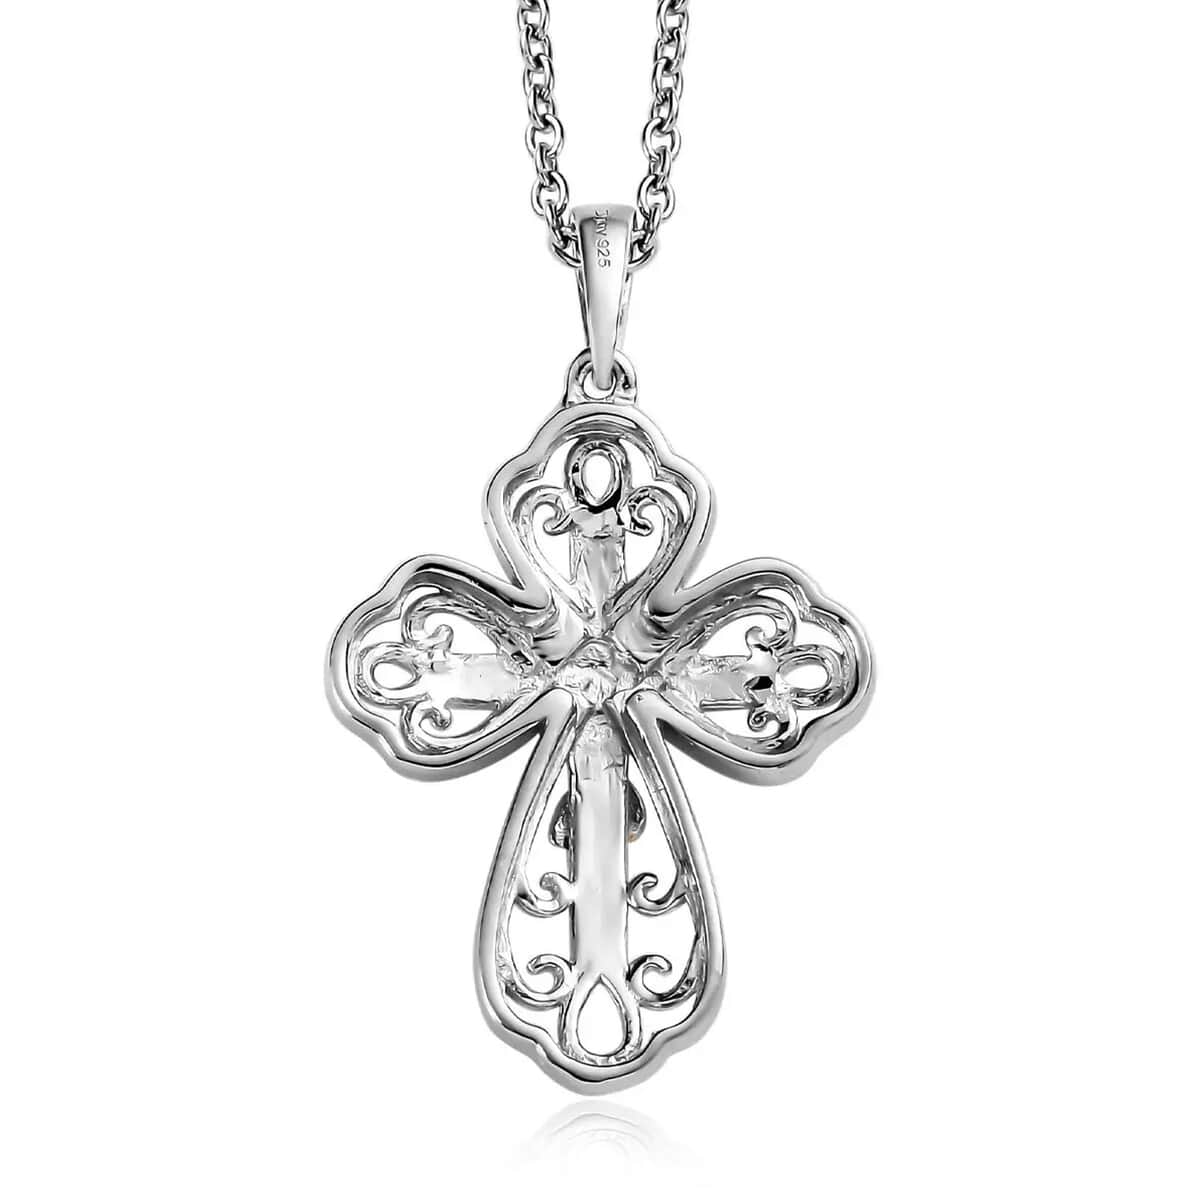 Crucifix Pendant Necklace, Budded Cross Pendant, Sterling Silver Pendant, Stainless Steel Chain, 20 Inch Pendant Necklace image number 5